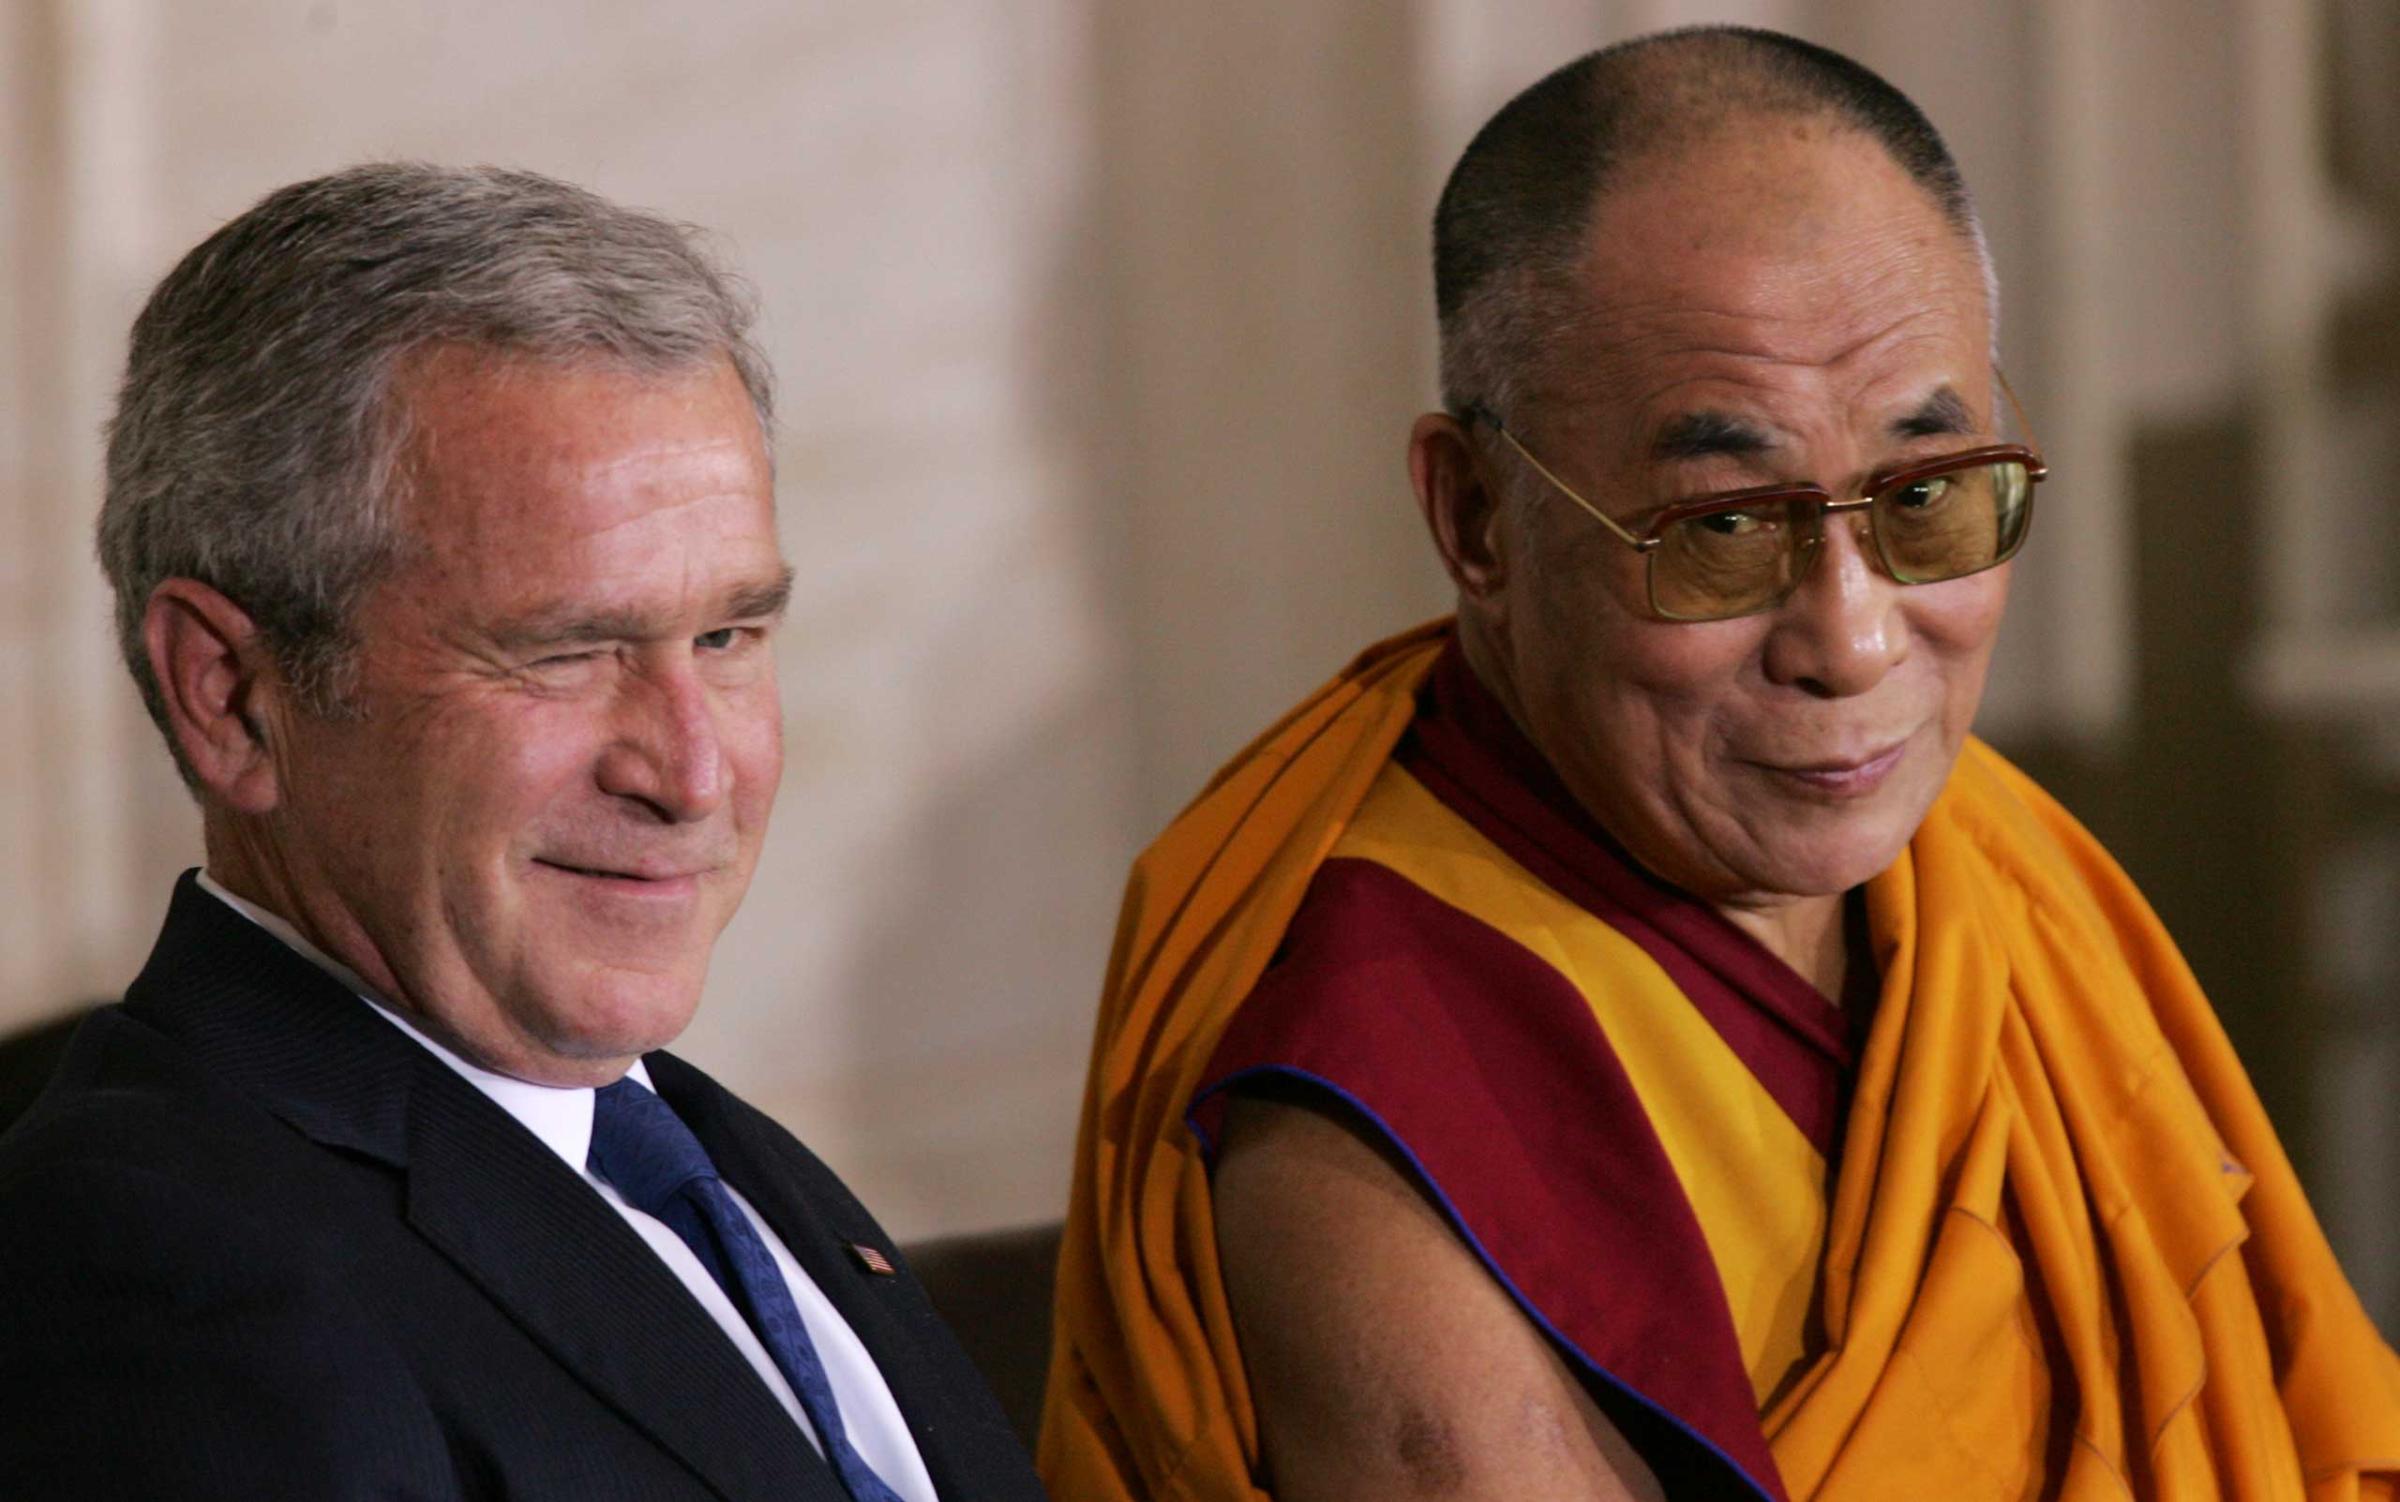 President George W. Bush winks while he sits with His Holiness the 14th Dalai Lama of Tibet during a ceremony presenting the Congressional Gold Medal to the Dalai Lama in the Rotunda of the US Capitol in Washington, DC, Oct. 2007.